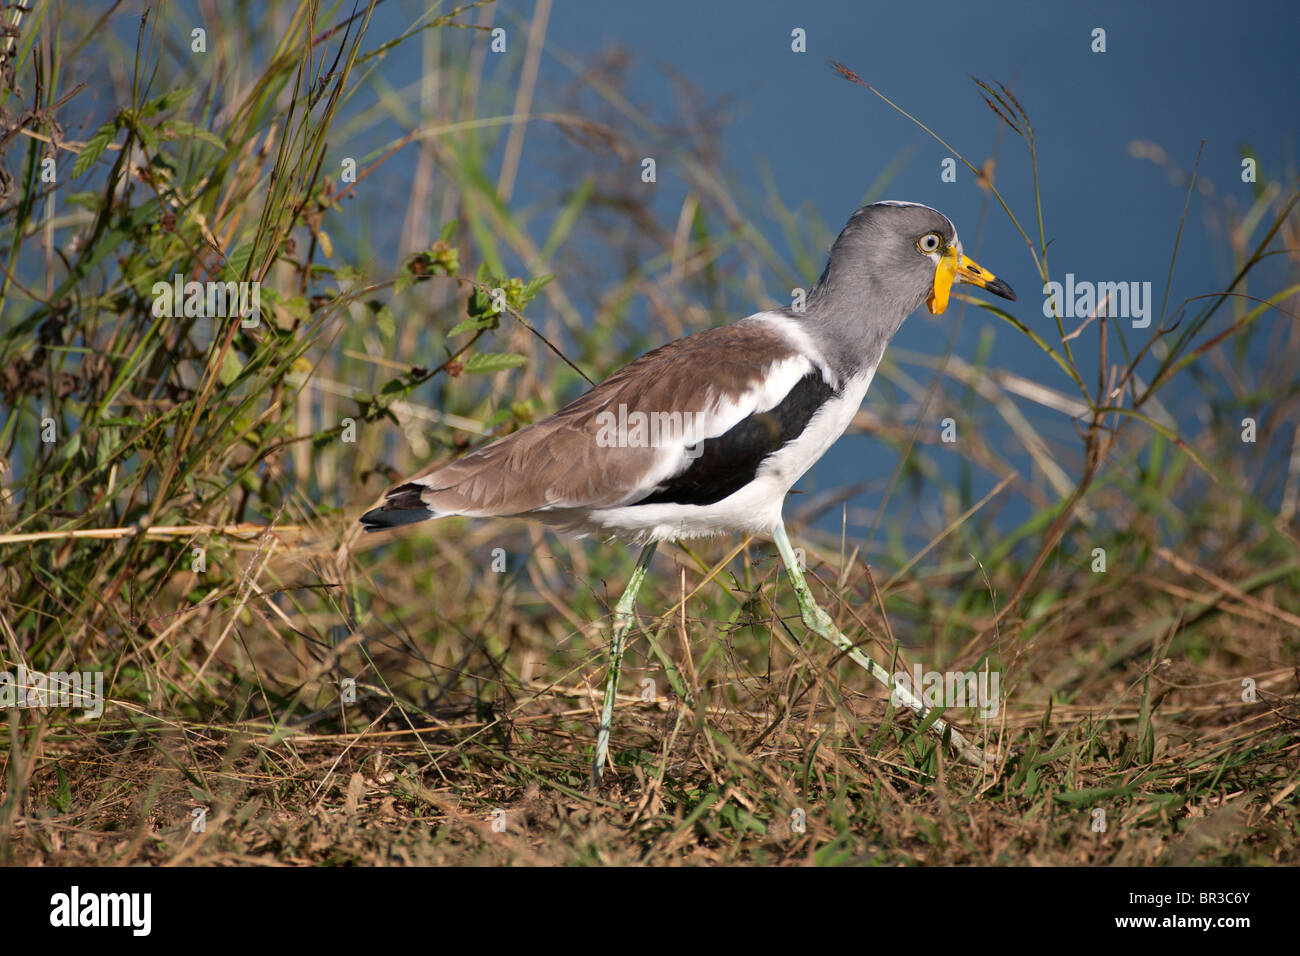 White-crowned Plover or Lapwing Walking Stock Photo